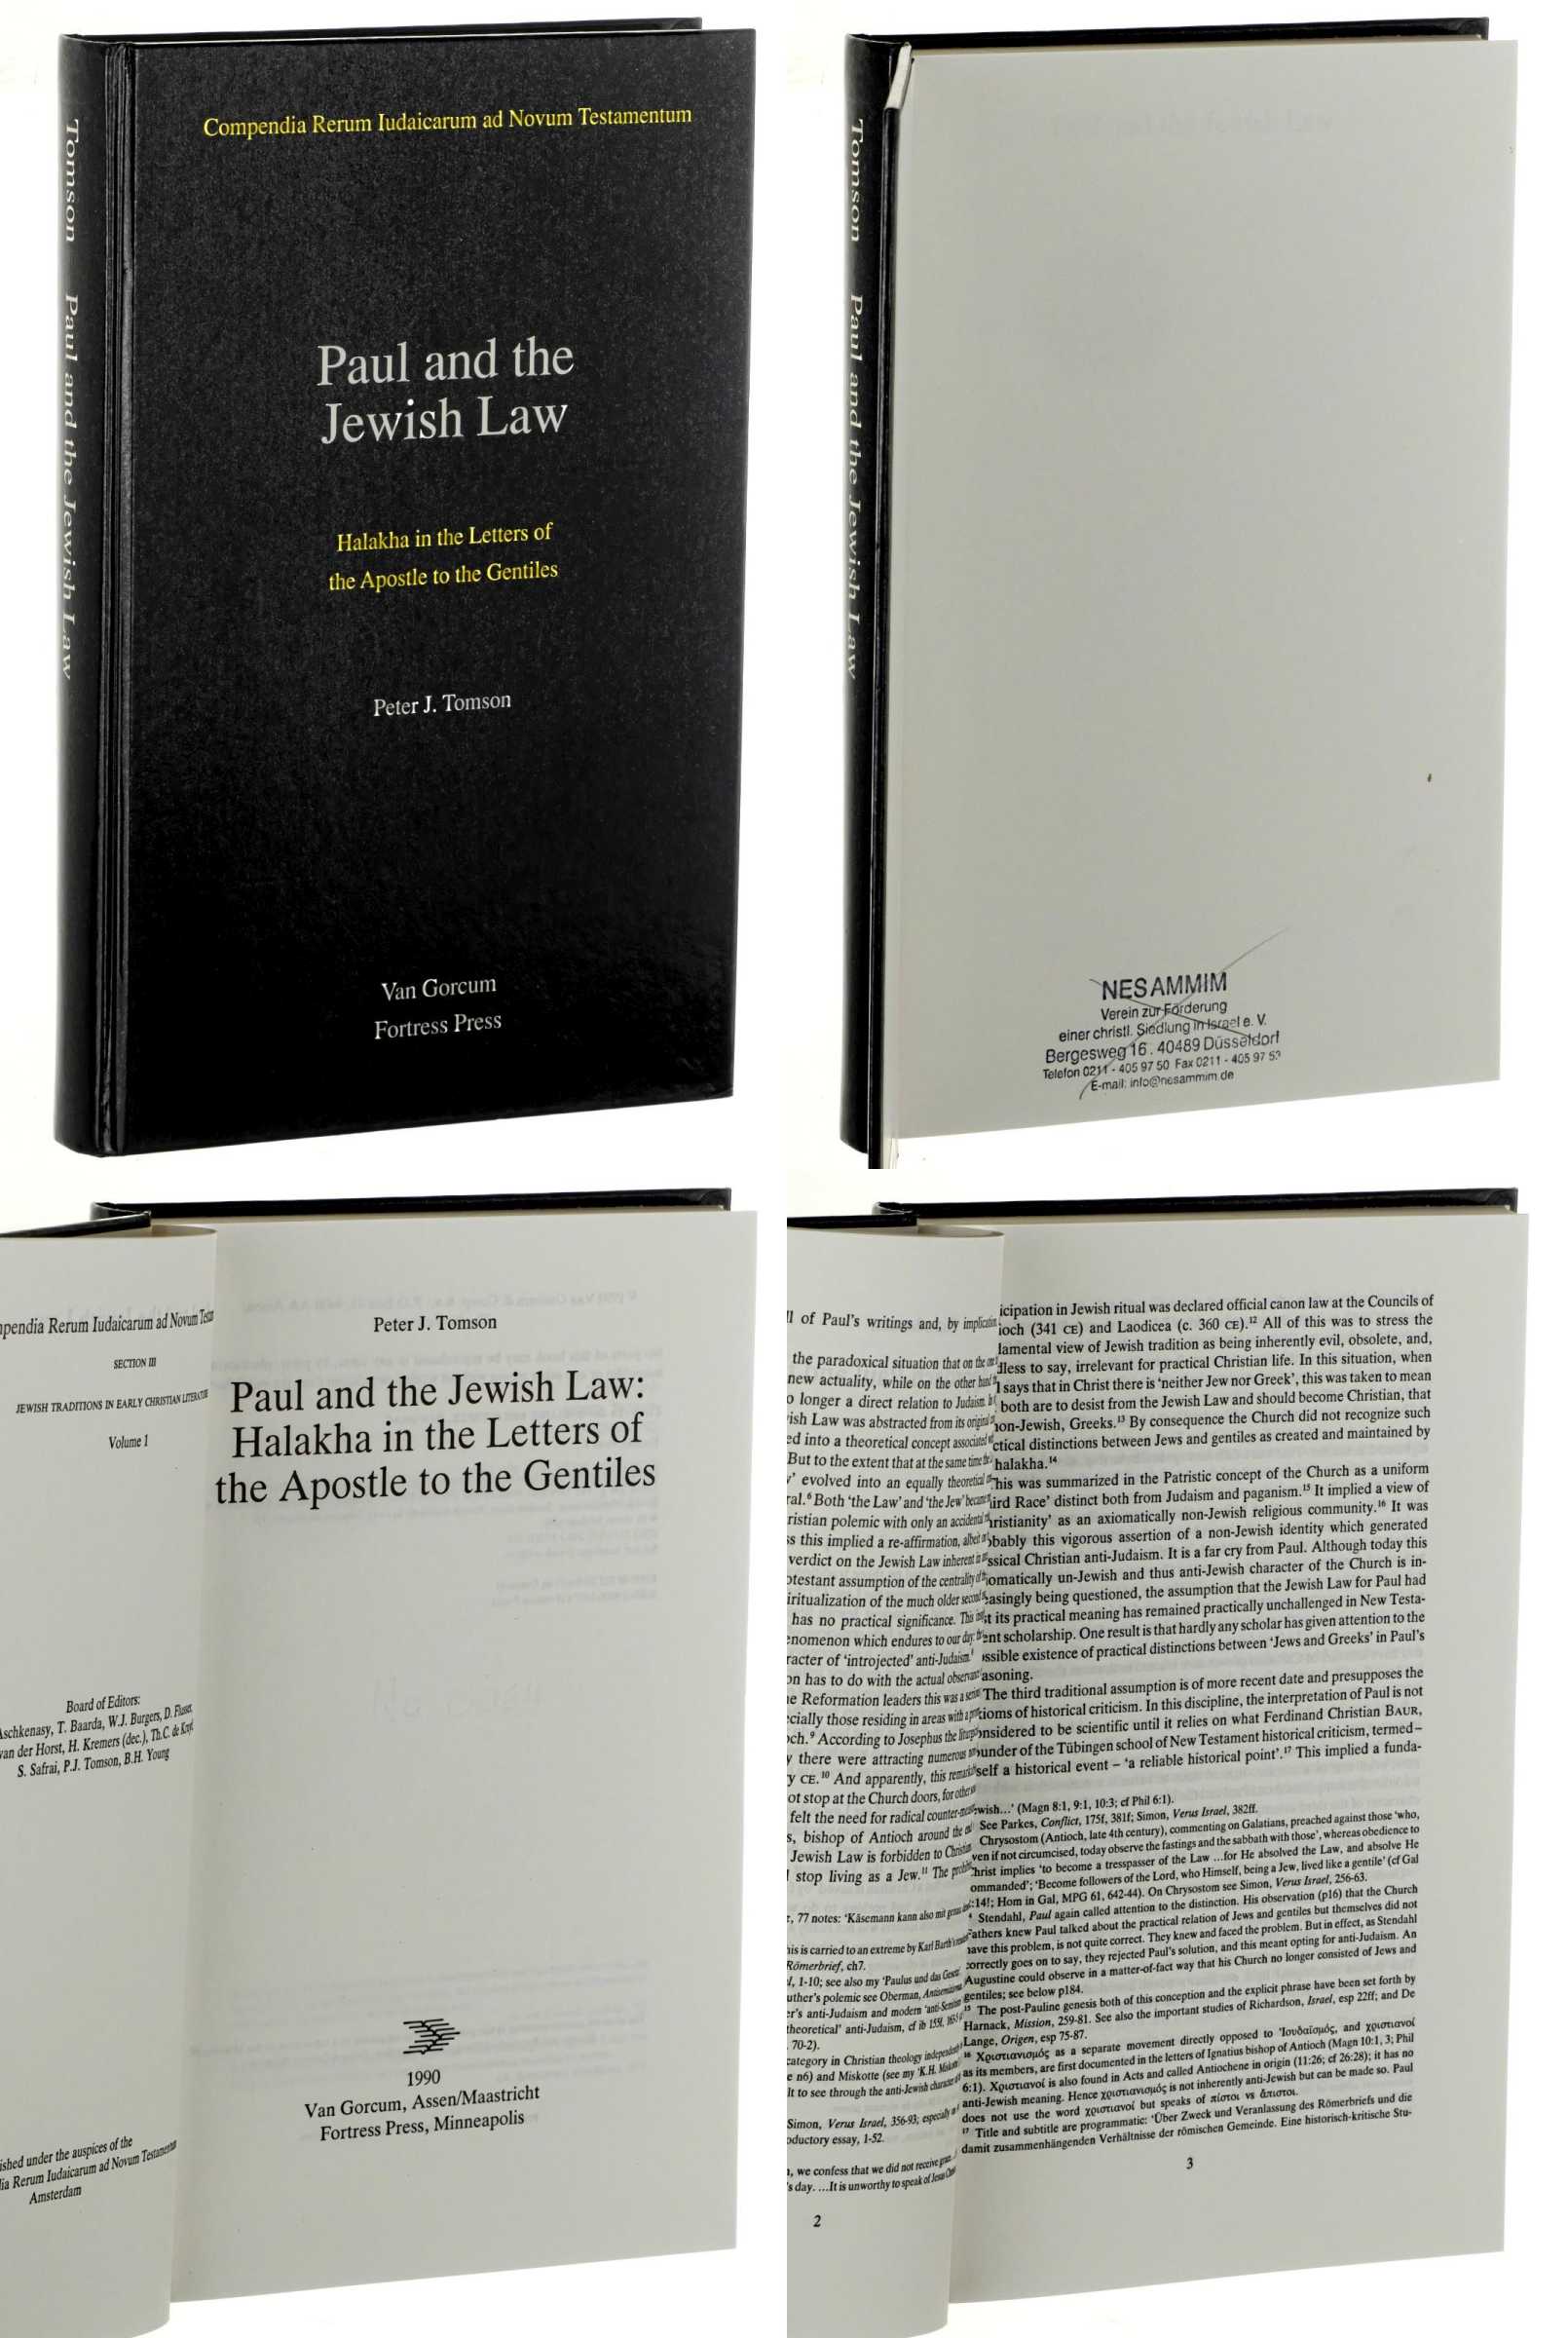 Tomson, Peter J.:  Paul and the Jewish law. Halakha in the letters of the Apostle to the Gentiles. 